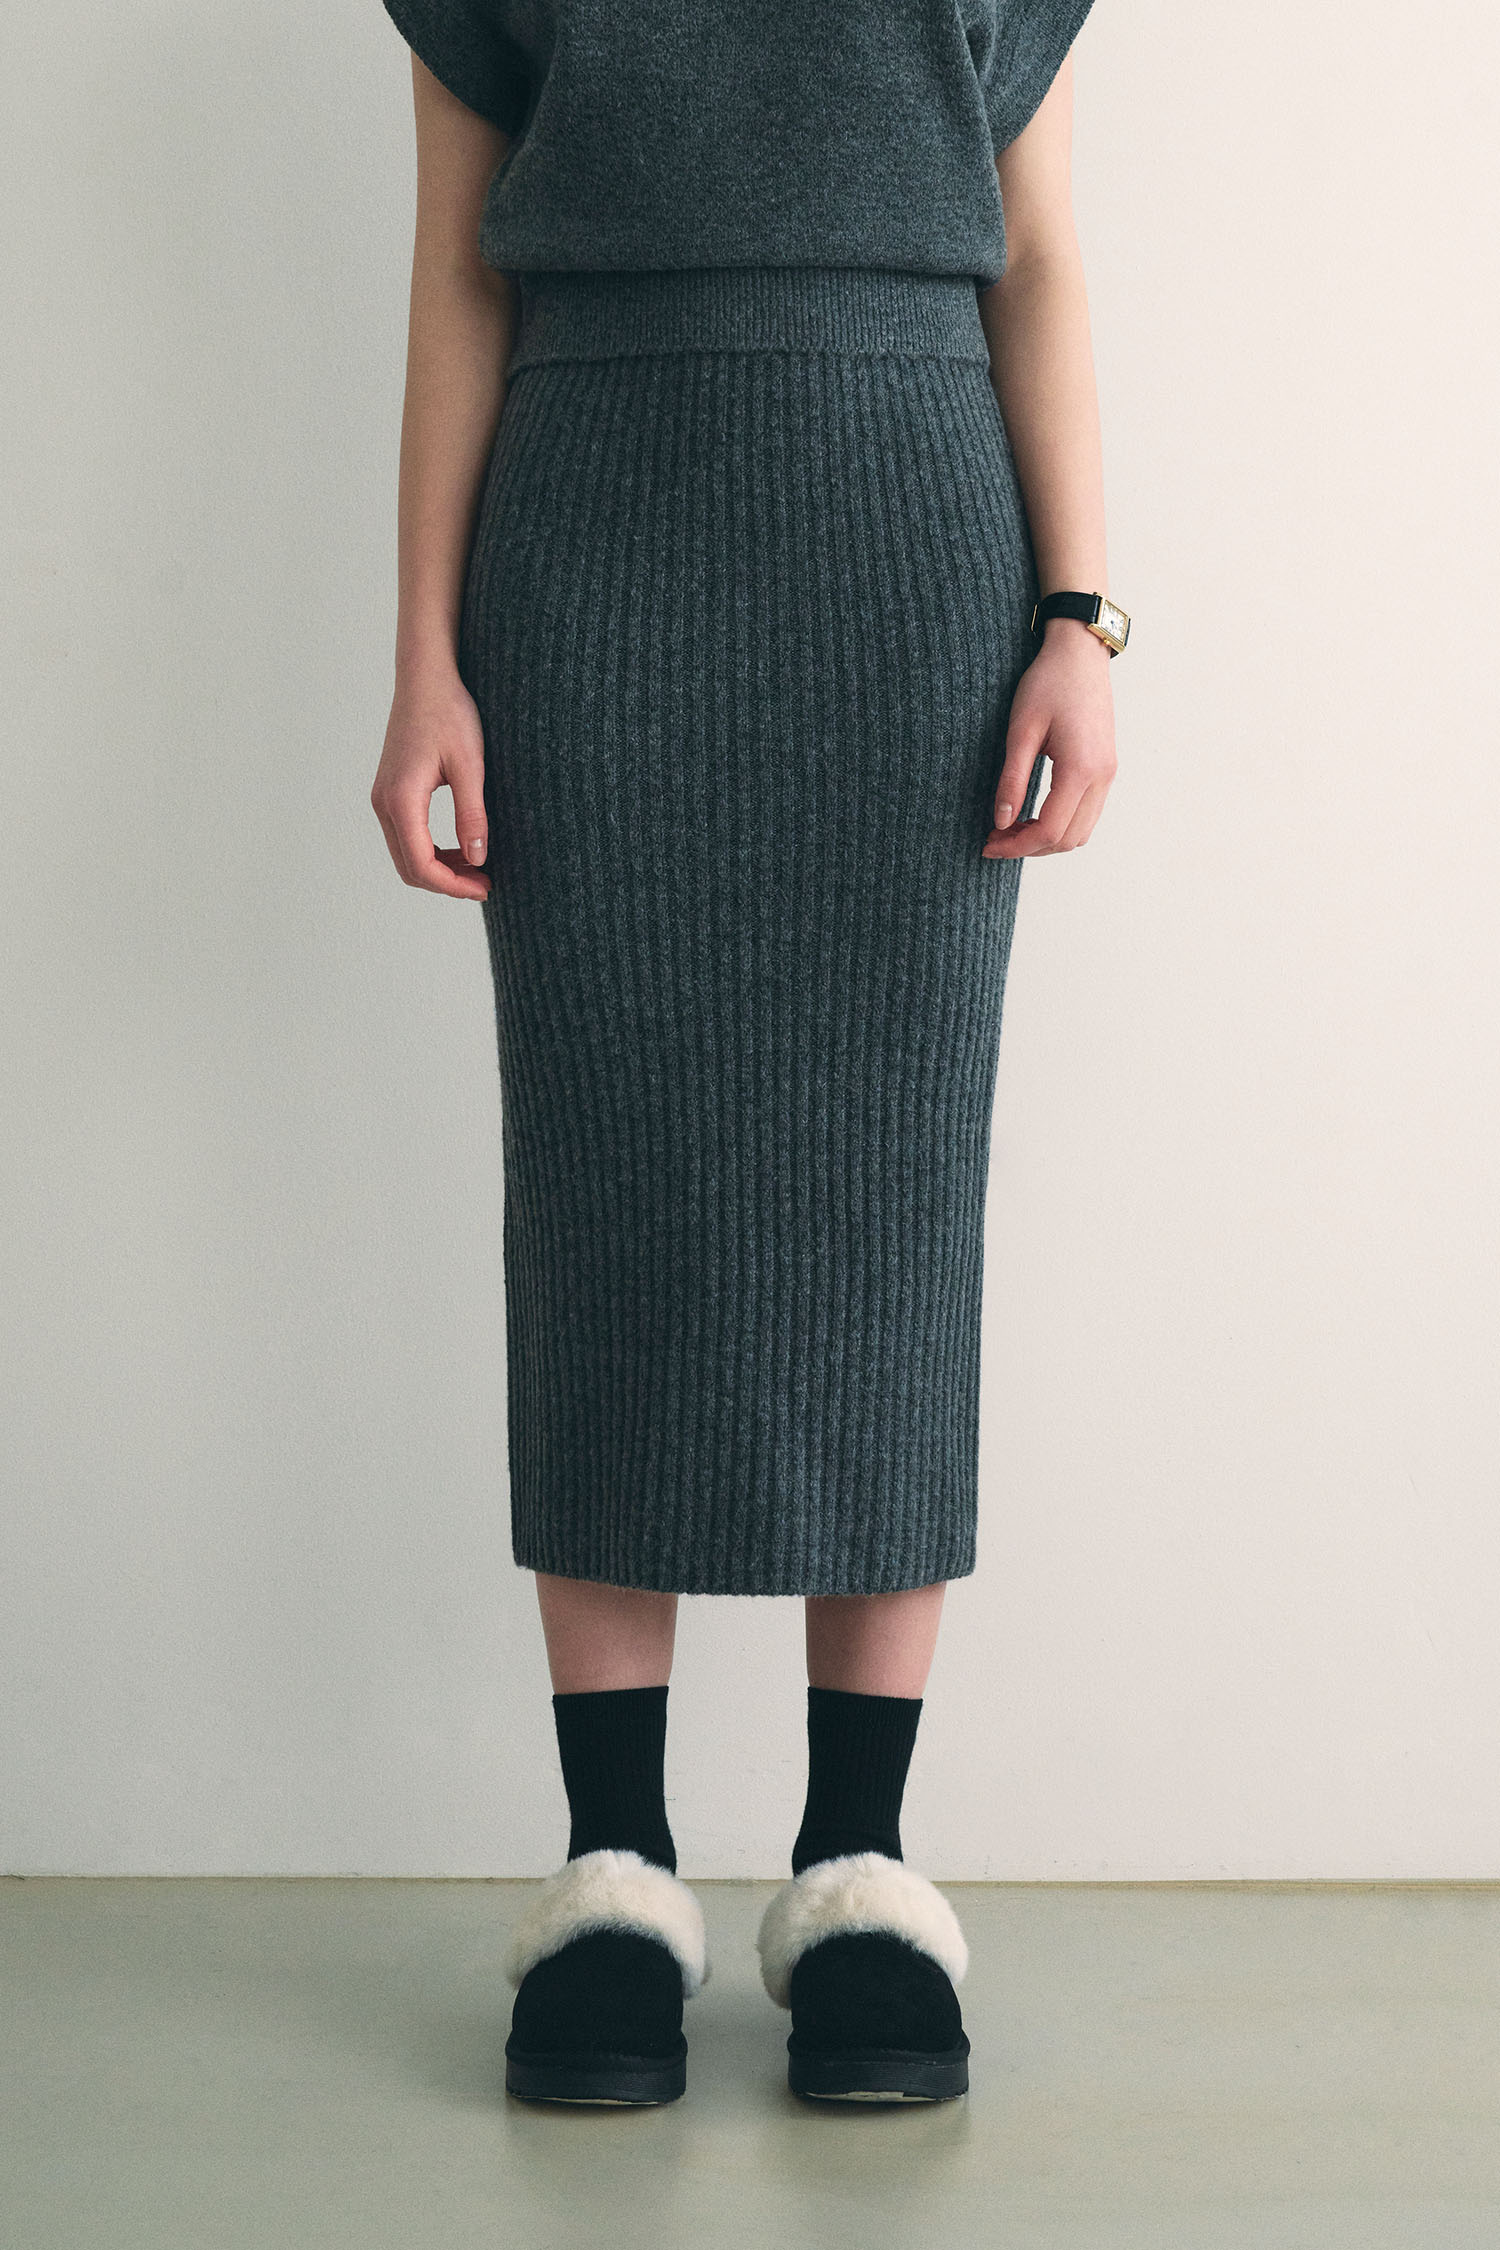 Warmth wrinkle knit skirt - gray